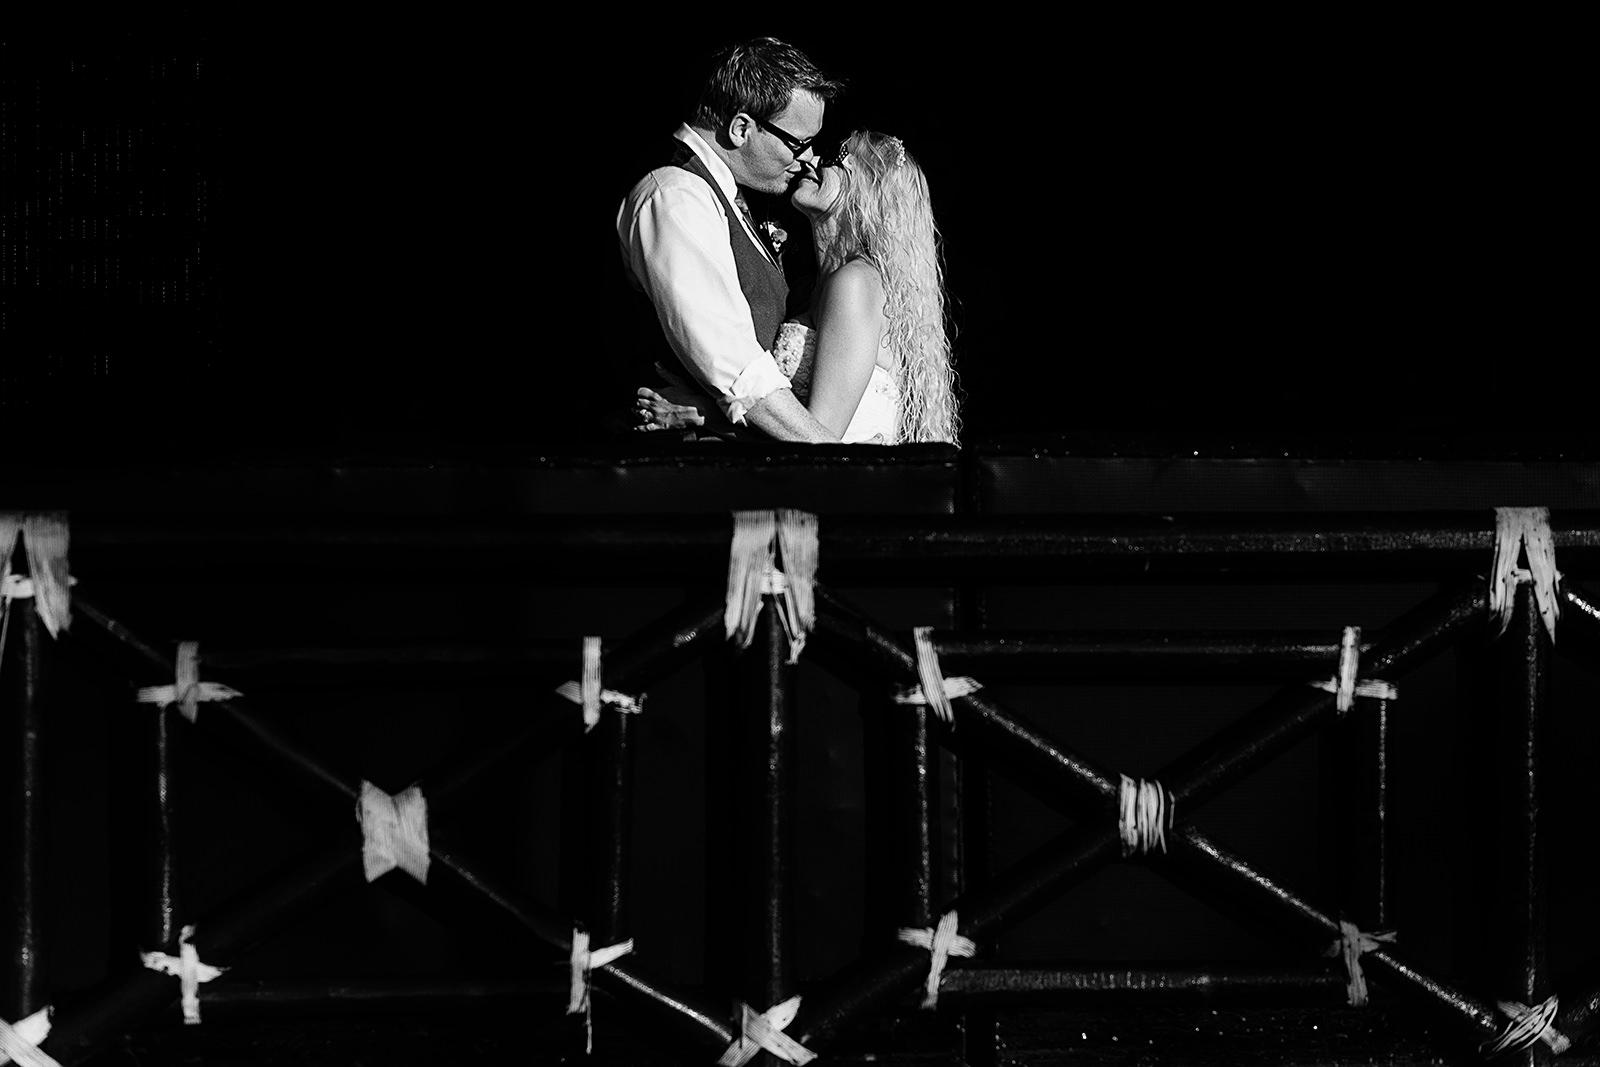 black and white kiss of wedding couple against black background